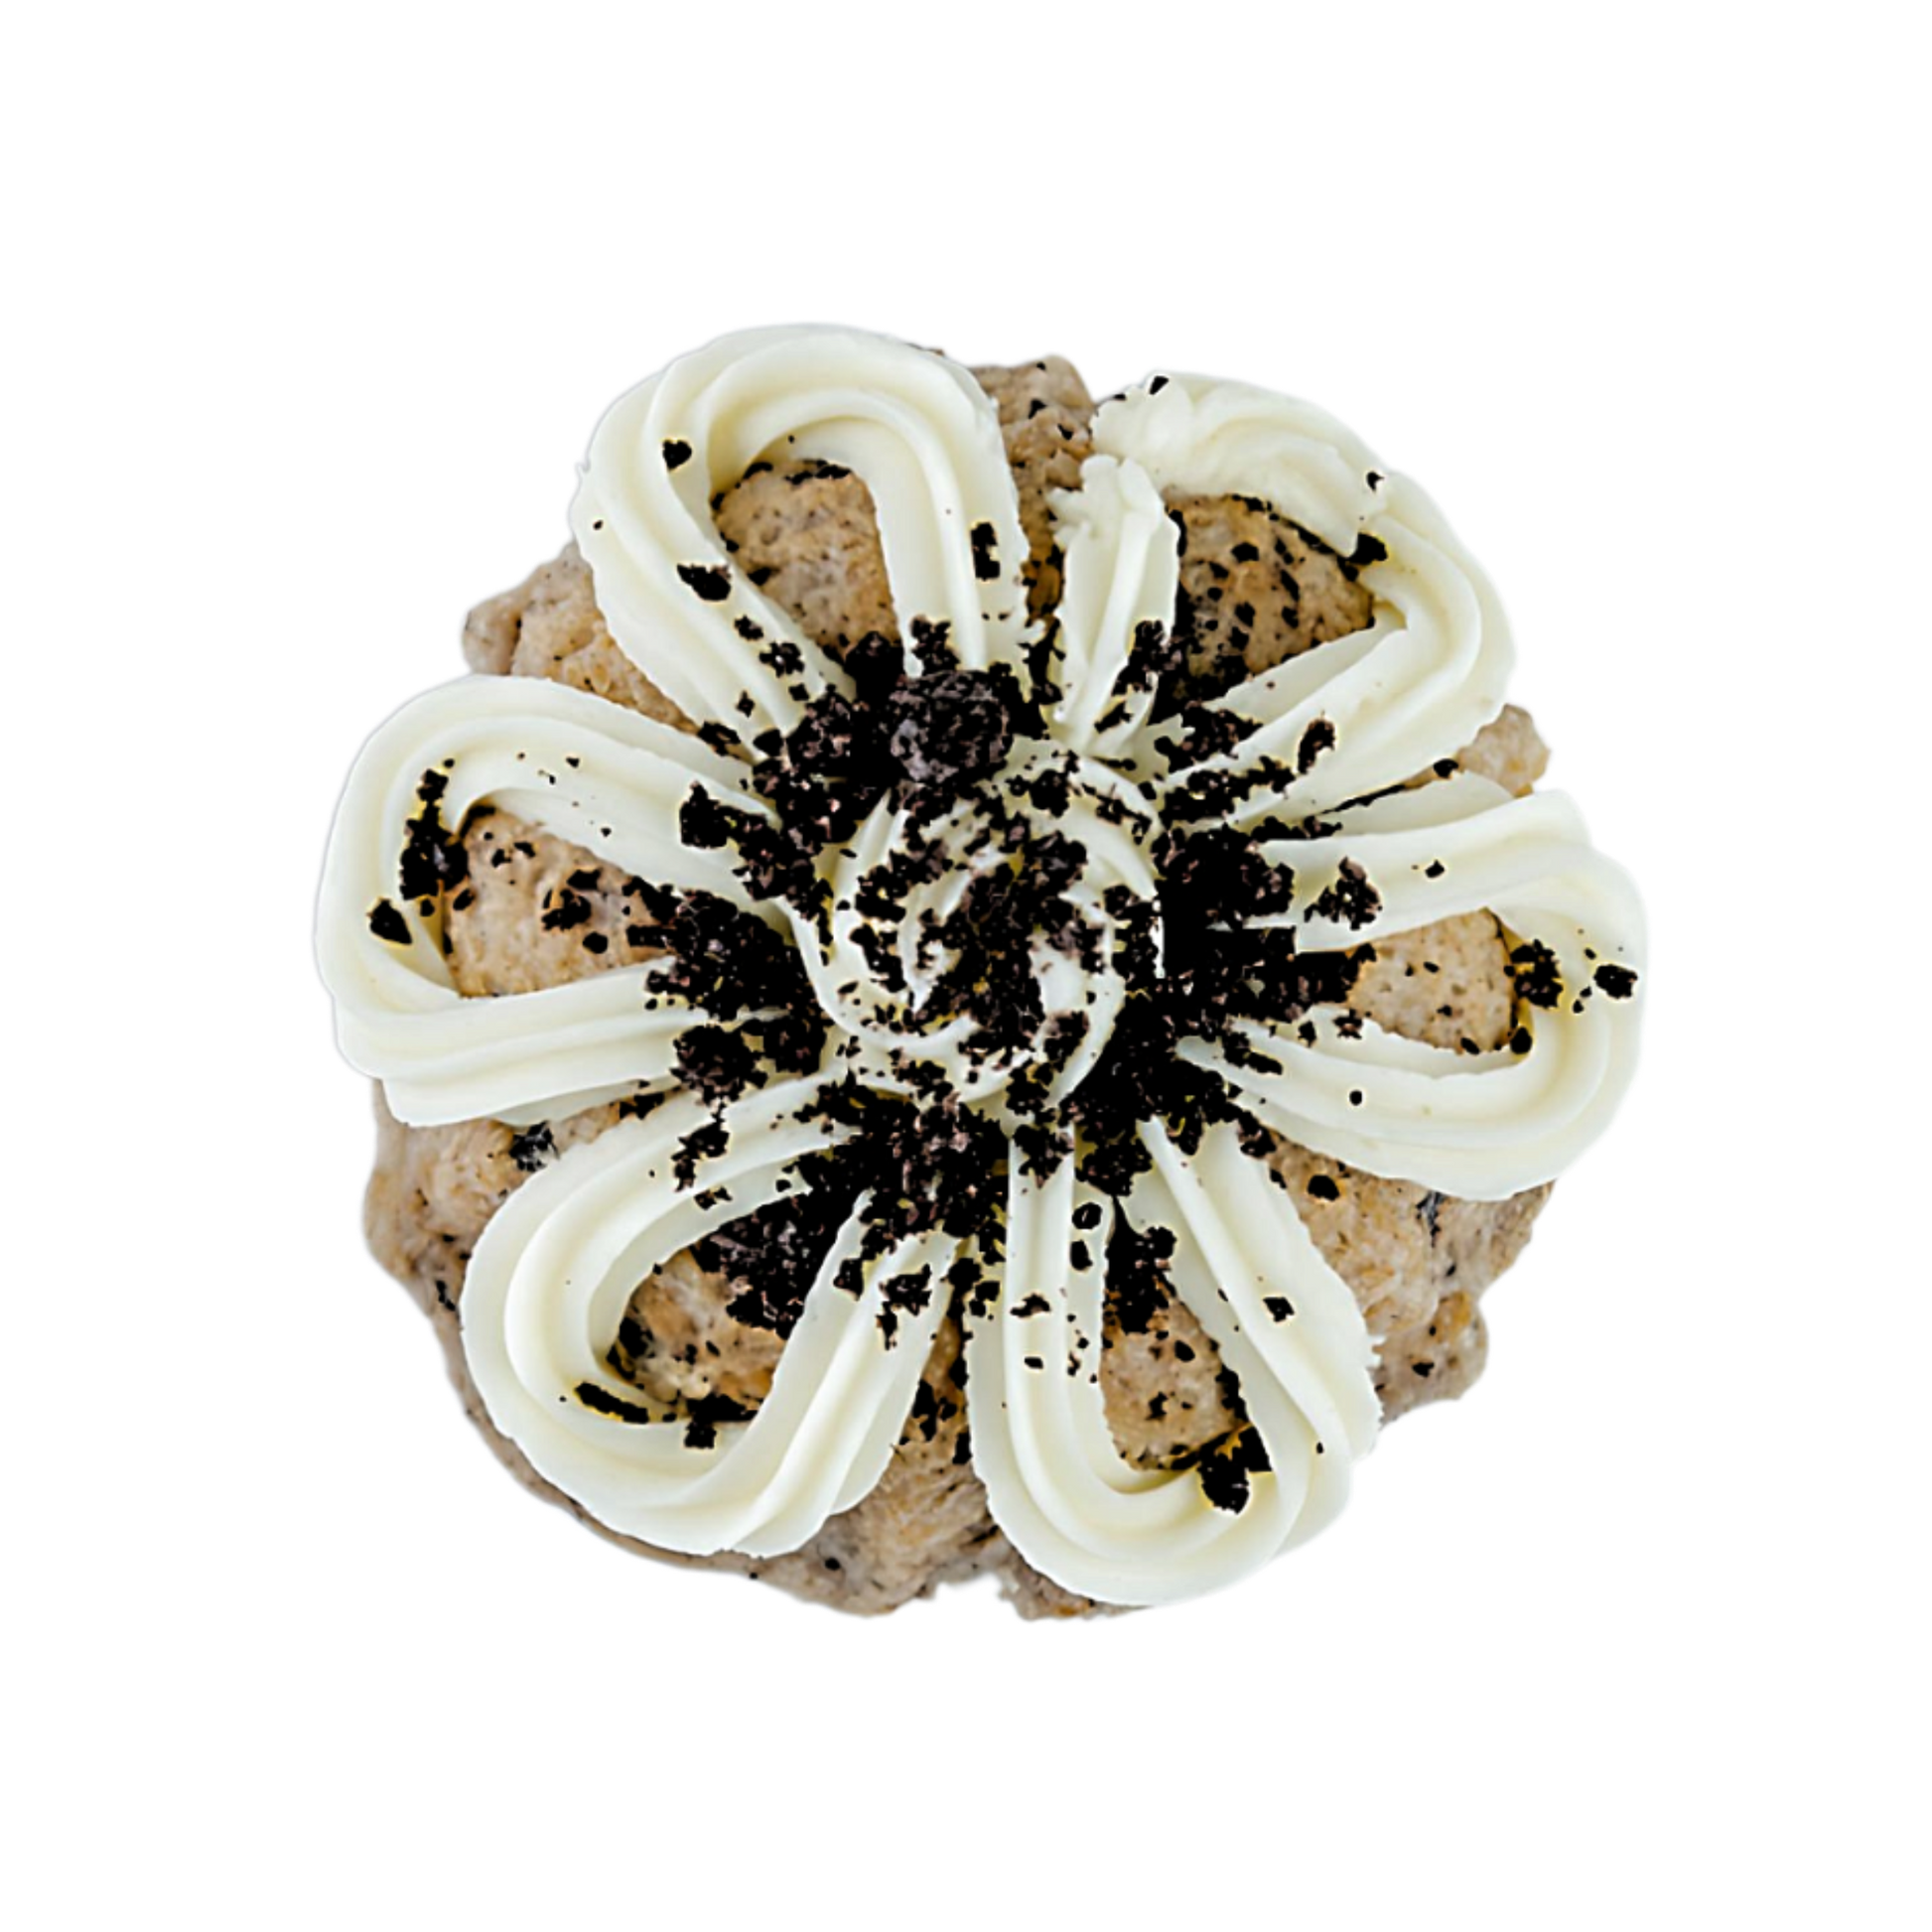 A tall glass of ice-cold milk and a scrumptious Oreo Cookies &amp; Cream Bundt Cake. This delightful treat is a favorite for the young at heart, with its rich, creamy texture and irresistible cookie crunch. Treat yourself to a little nostalgia and add this mouthwatering dessert to your cart today!